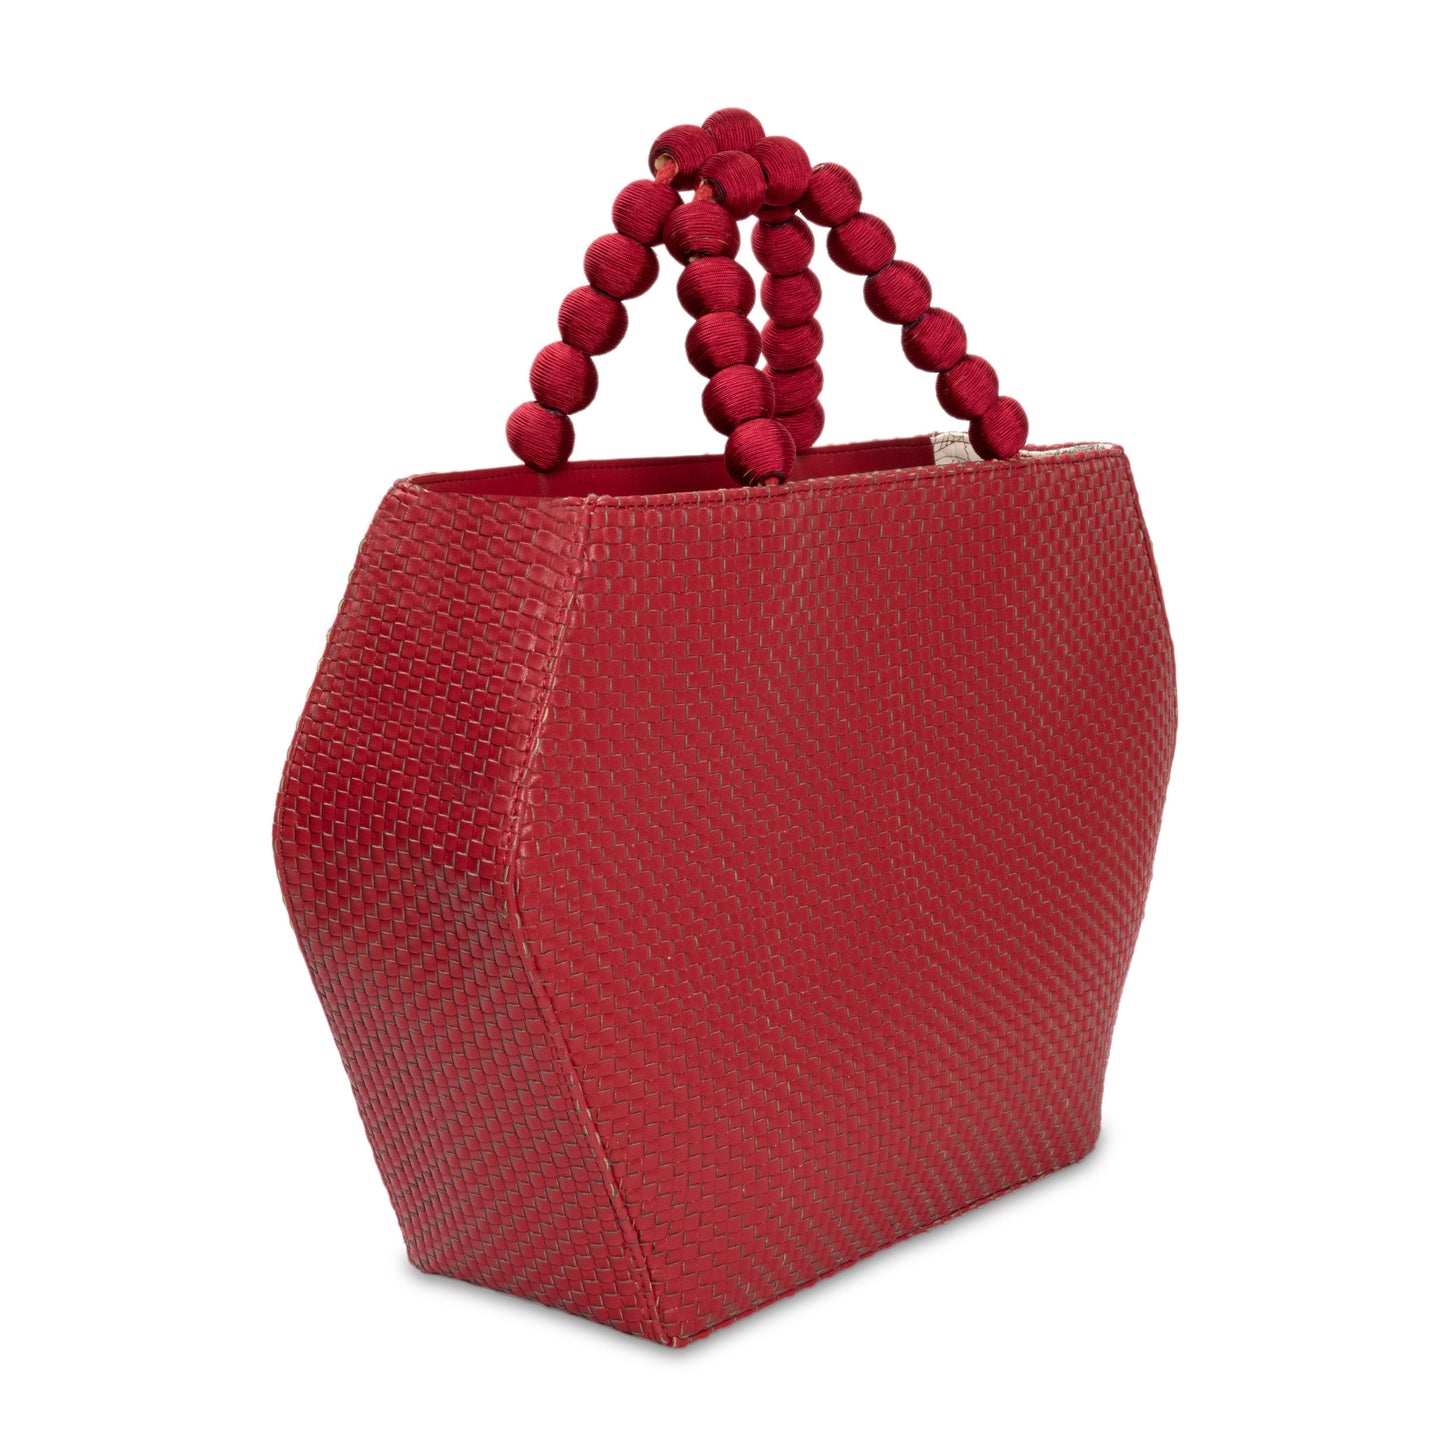 The Frida Tote - Passion Red (Customizable)